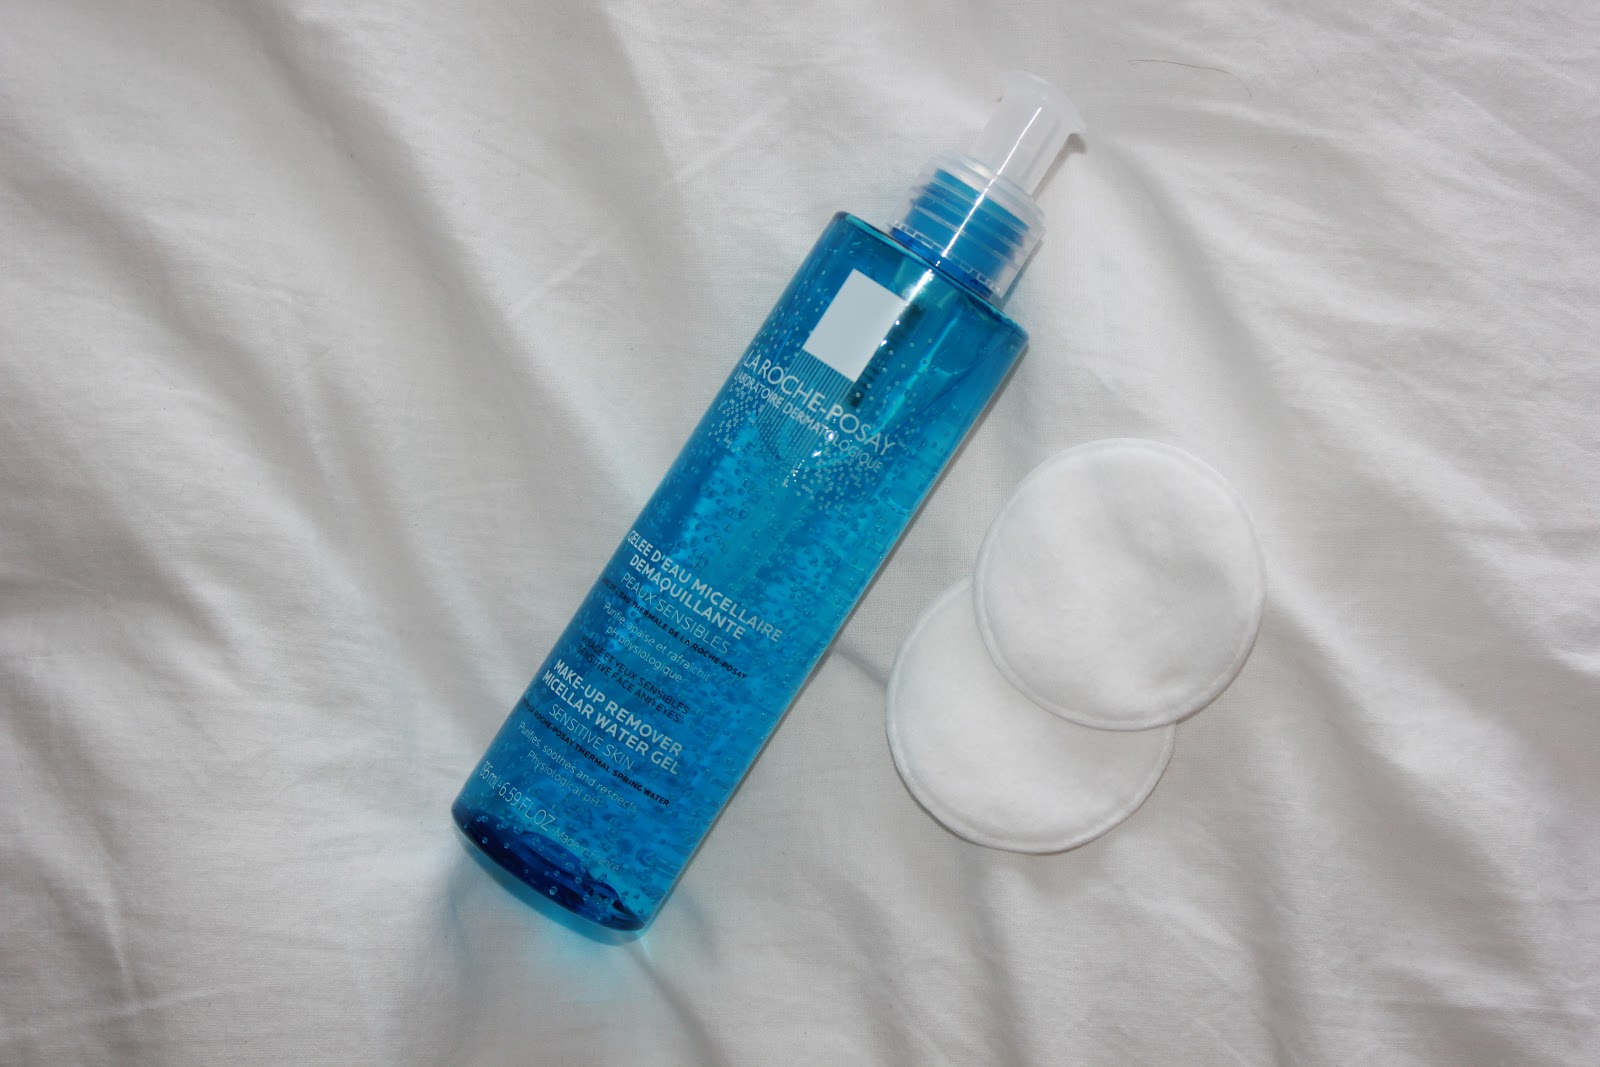 Beauty She Wrote - Blog: La Roche Posay - Physiological Make-up Remover Micellar Water Gel Review